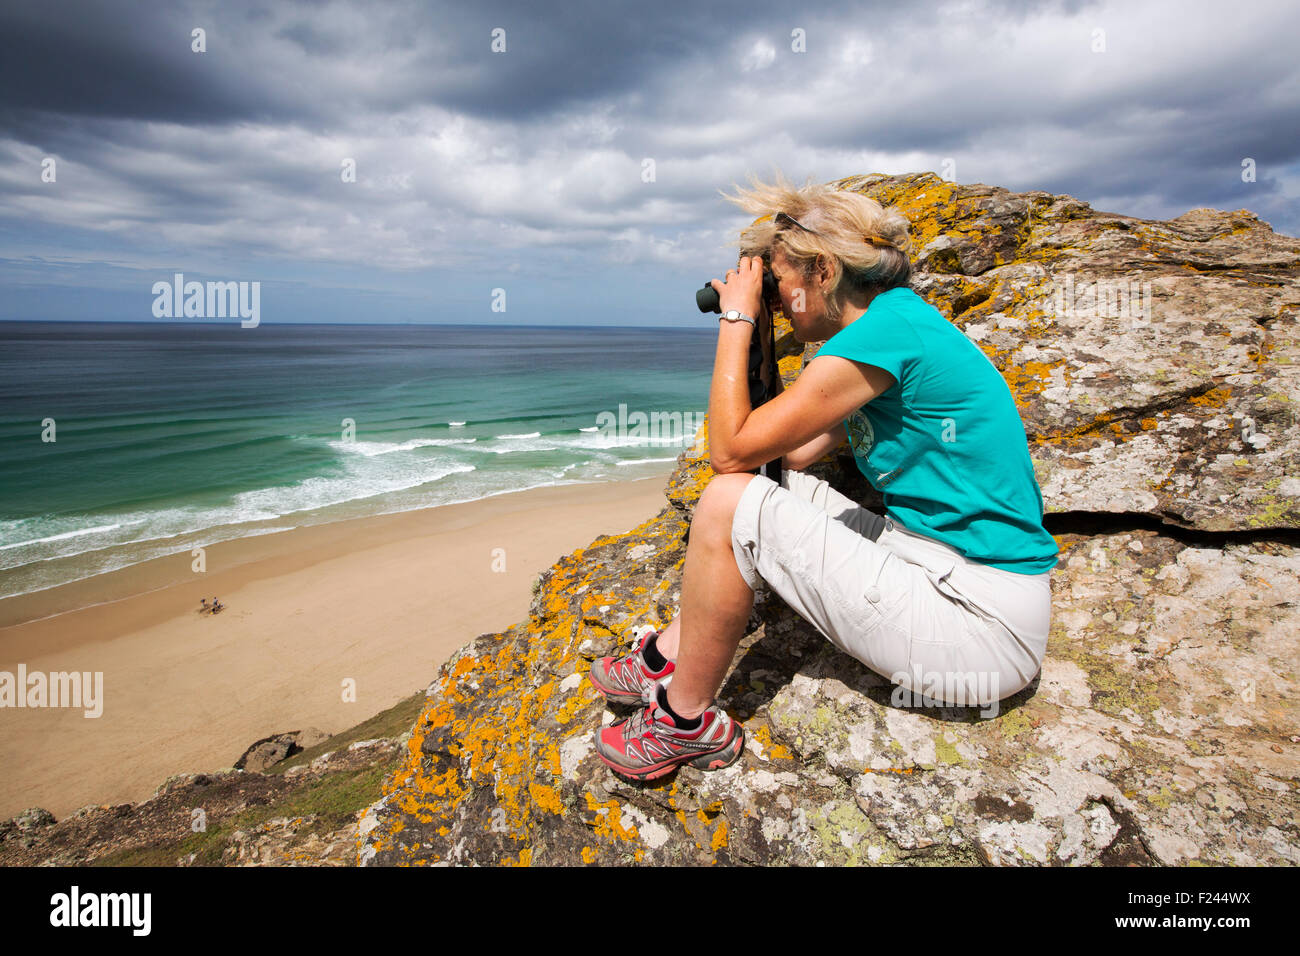 A woman sea watching on the cliffs at St Agnes, Cornwall, UK. Stock Photo